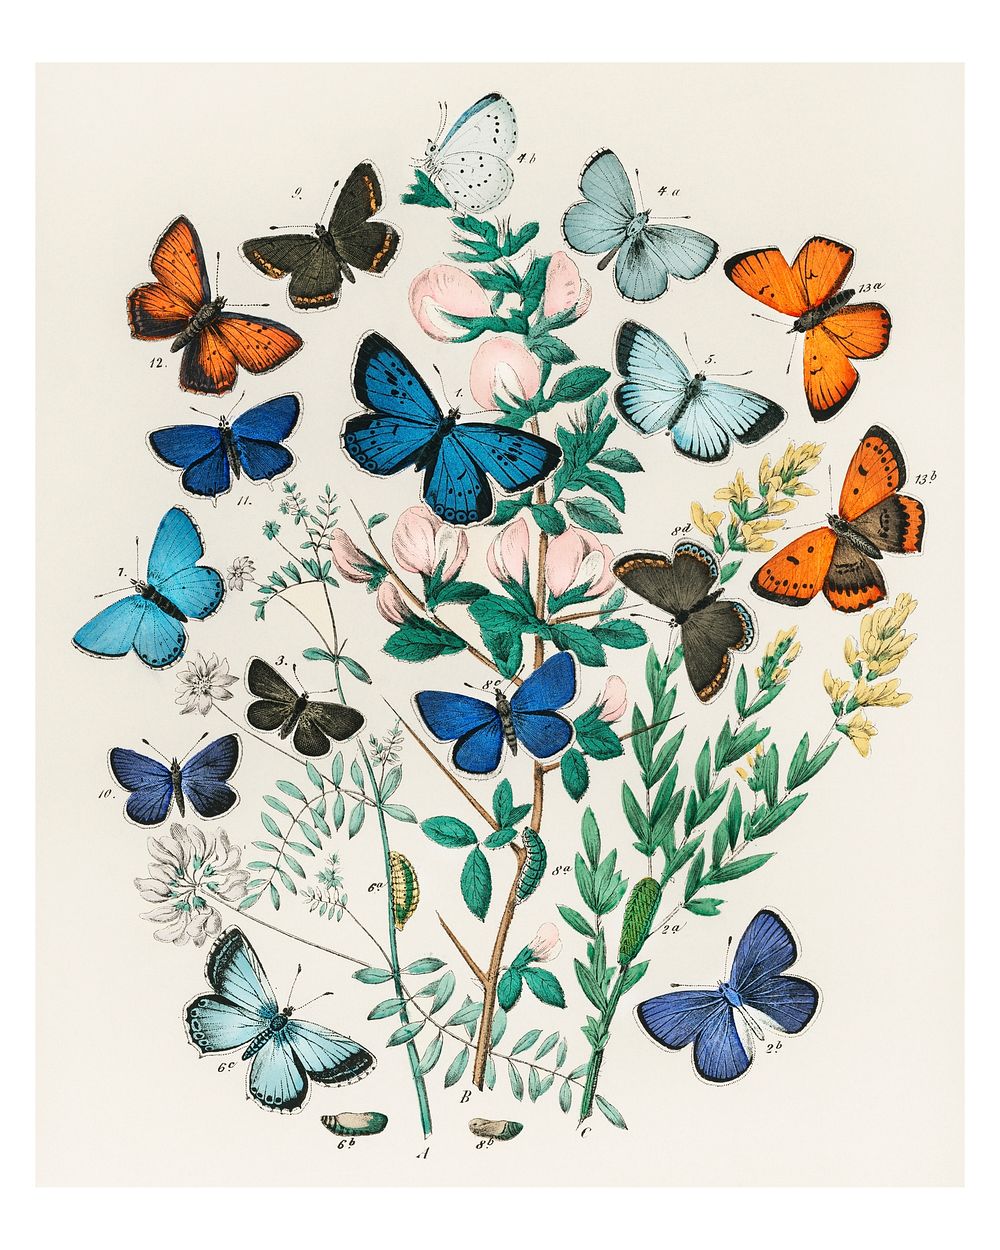 Variation beautiful color butterflies vintage illustration wall art print and poster design remix from original artwork.